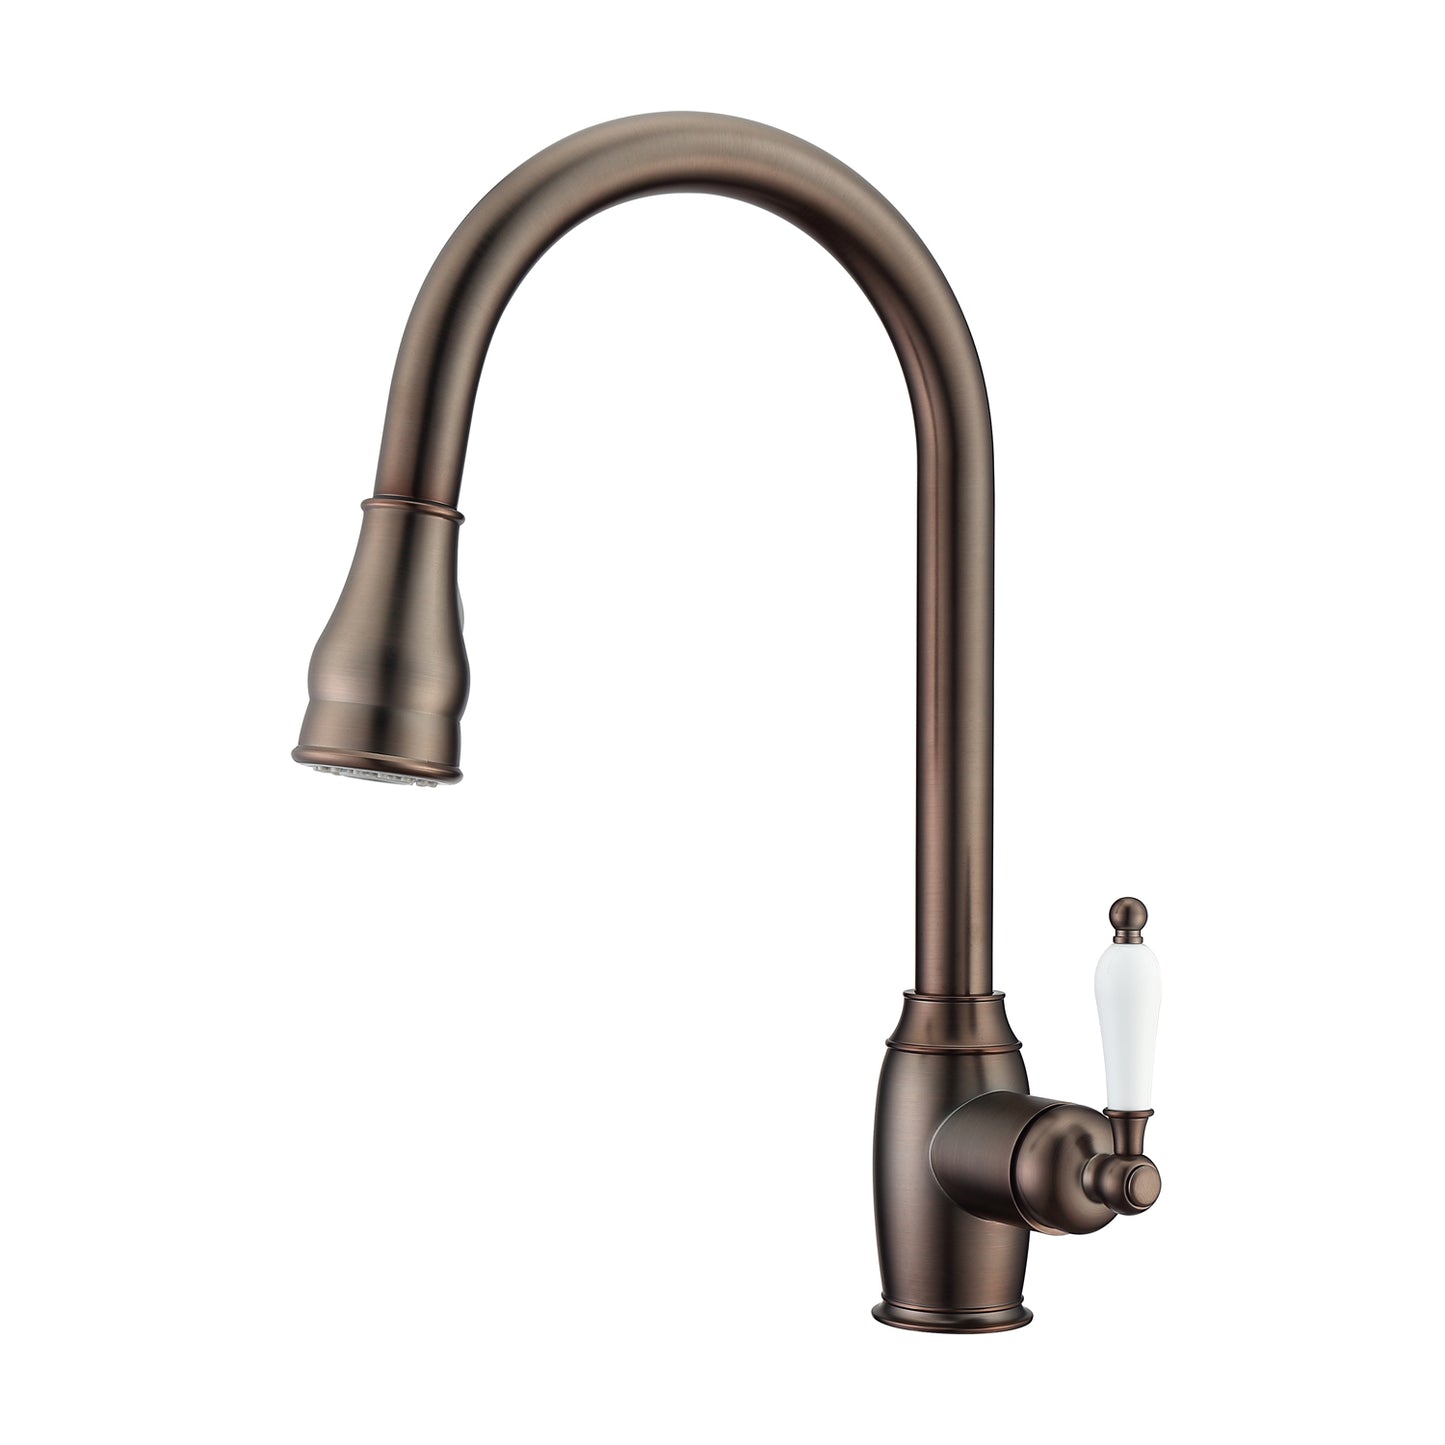 Bay 2 Kitchen Faucet, Pull-Out Sprayer, Single Lever Handle, Oil Rubbed Bronze